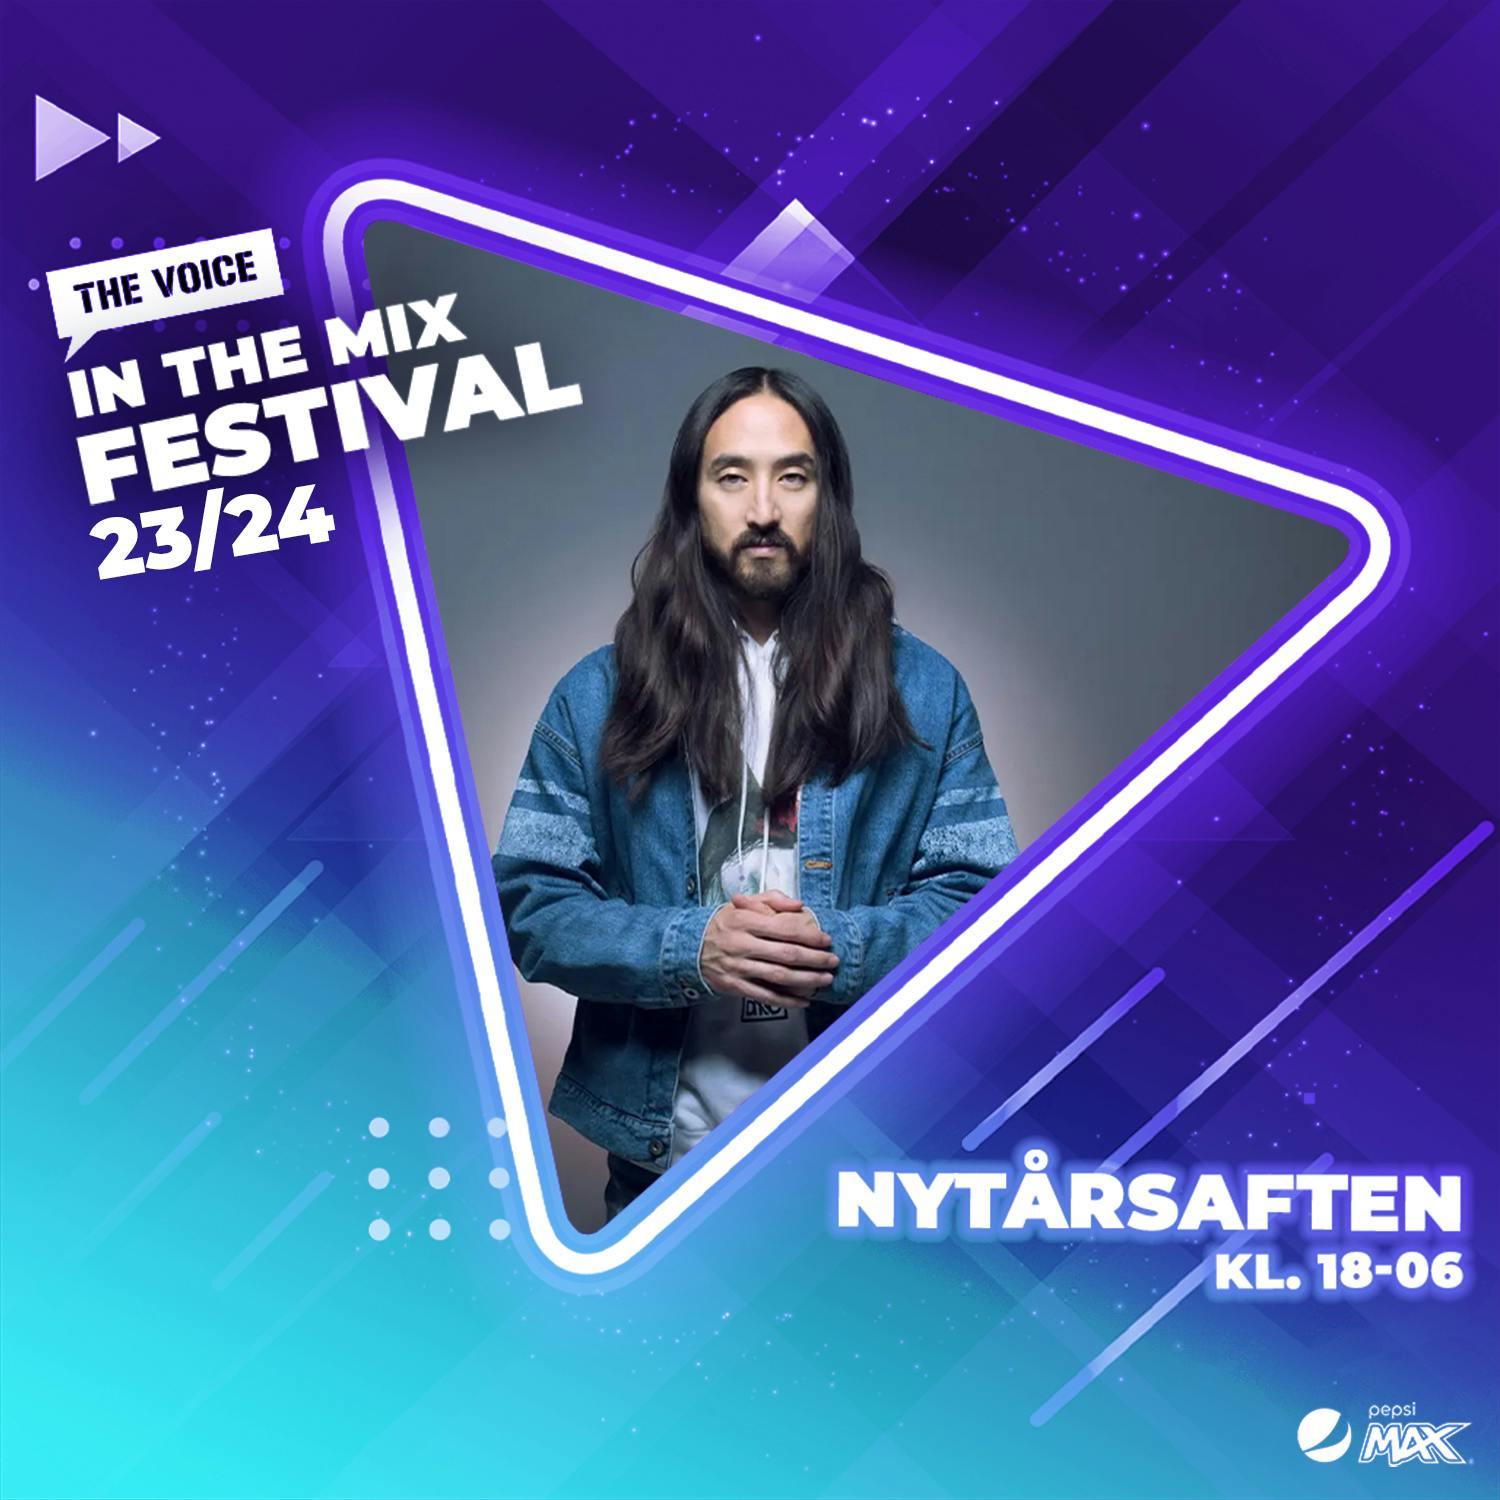 Steve Aoki - The Voice In The Mix Festival 23/24